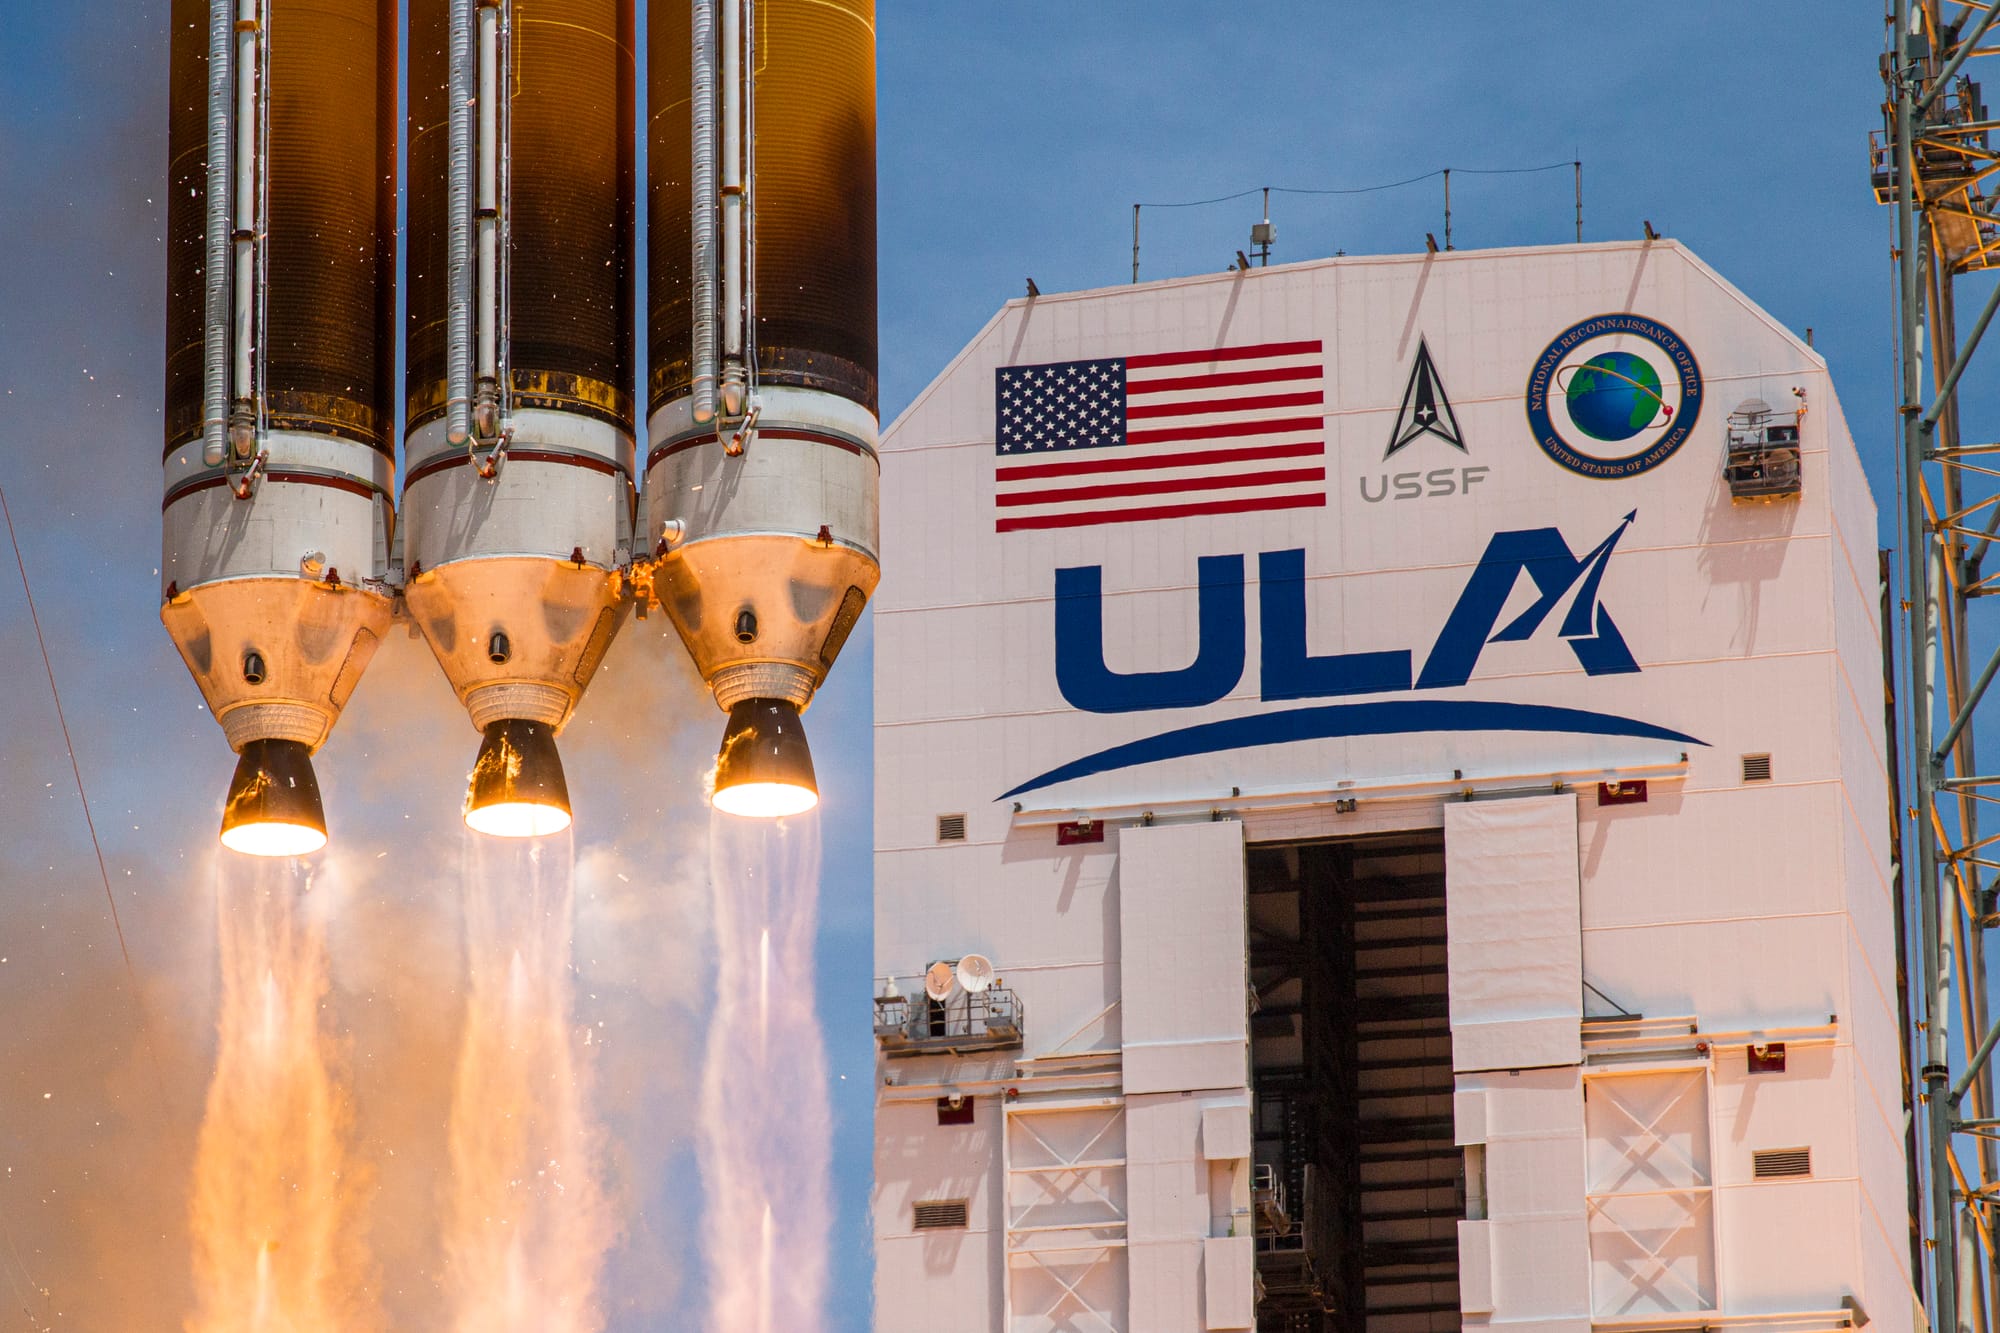 Delta IV Heavy lifting off from Space Launch Complex 37B for NROL-70. ©United Launch Alliance 